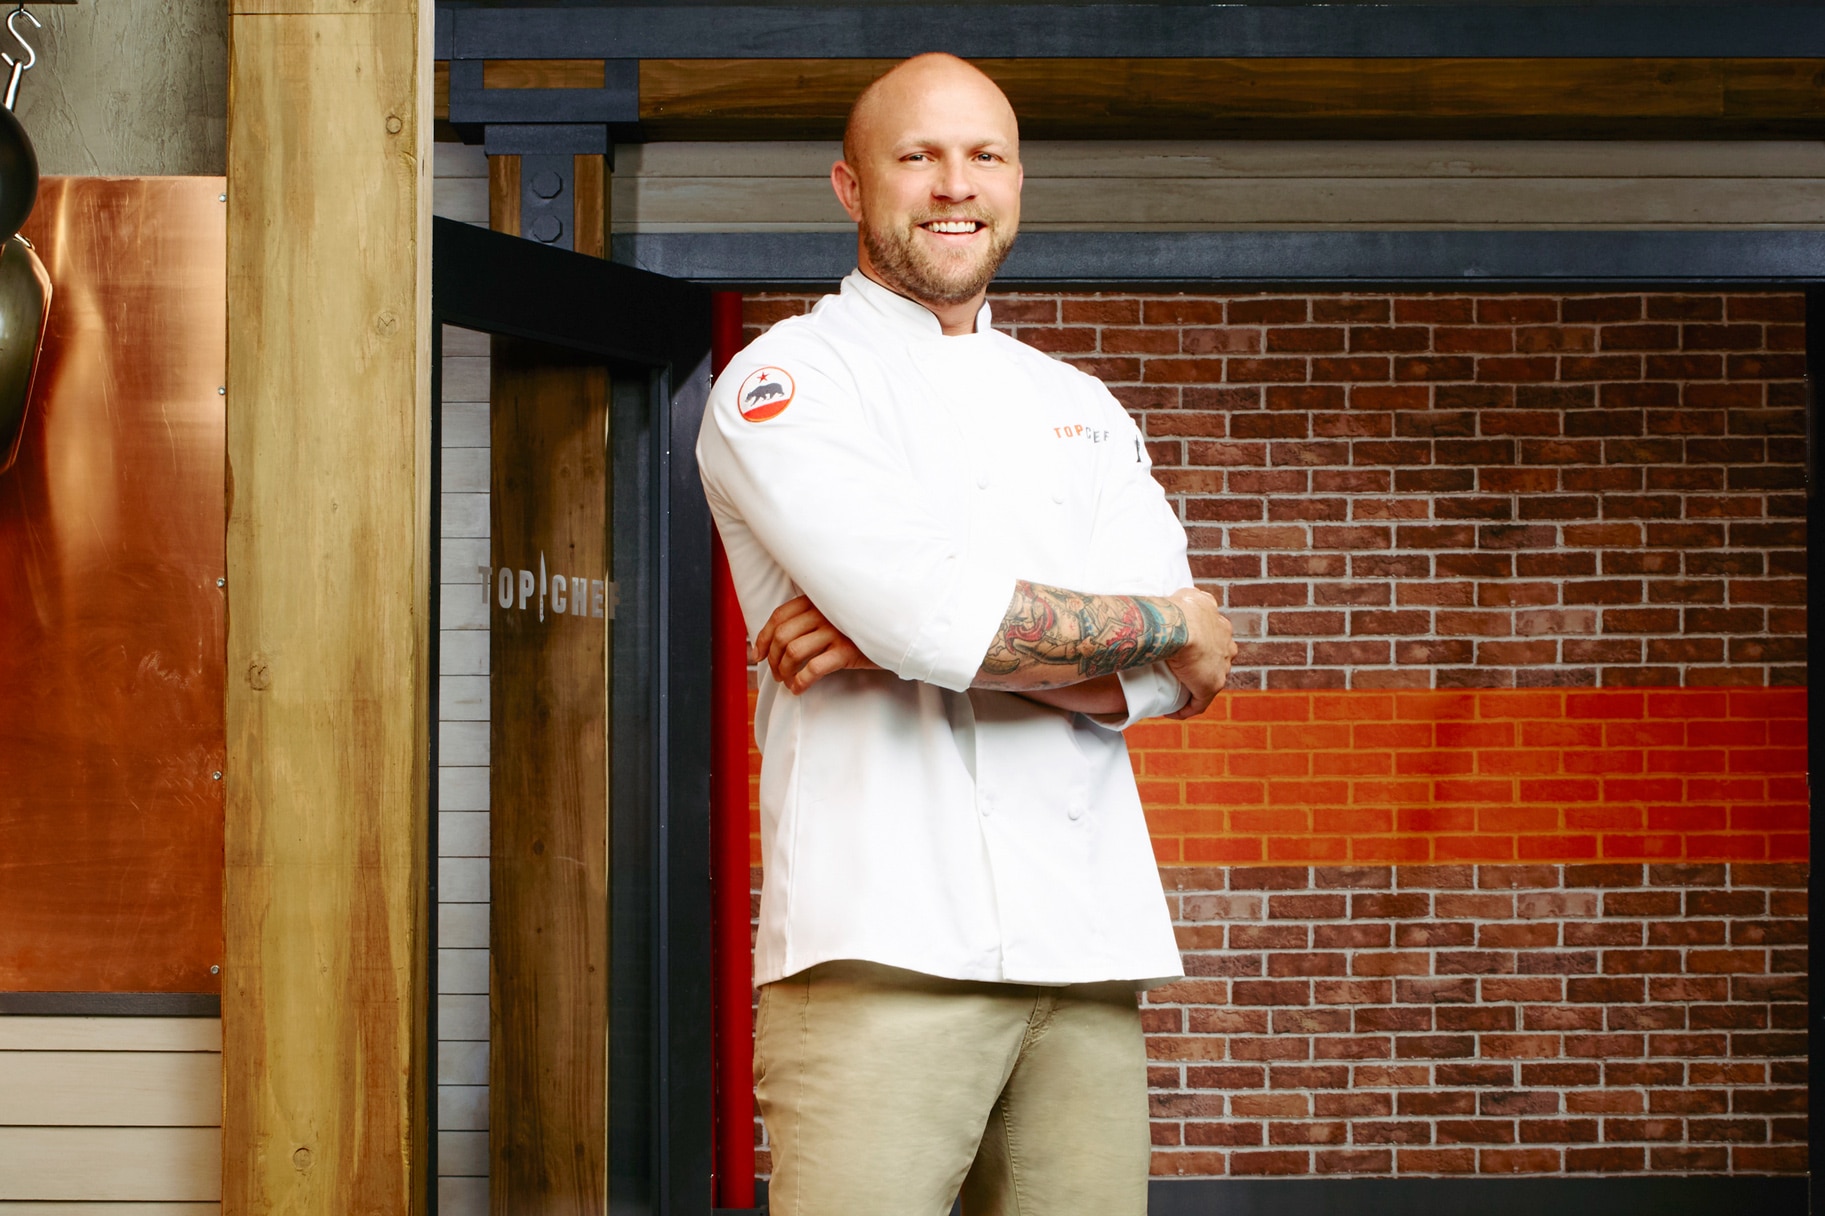 Where Is Top Chef's Season Winner Ford Now? | Top Chef Blog